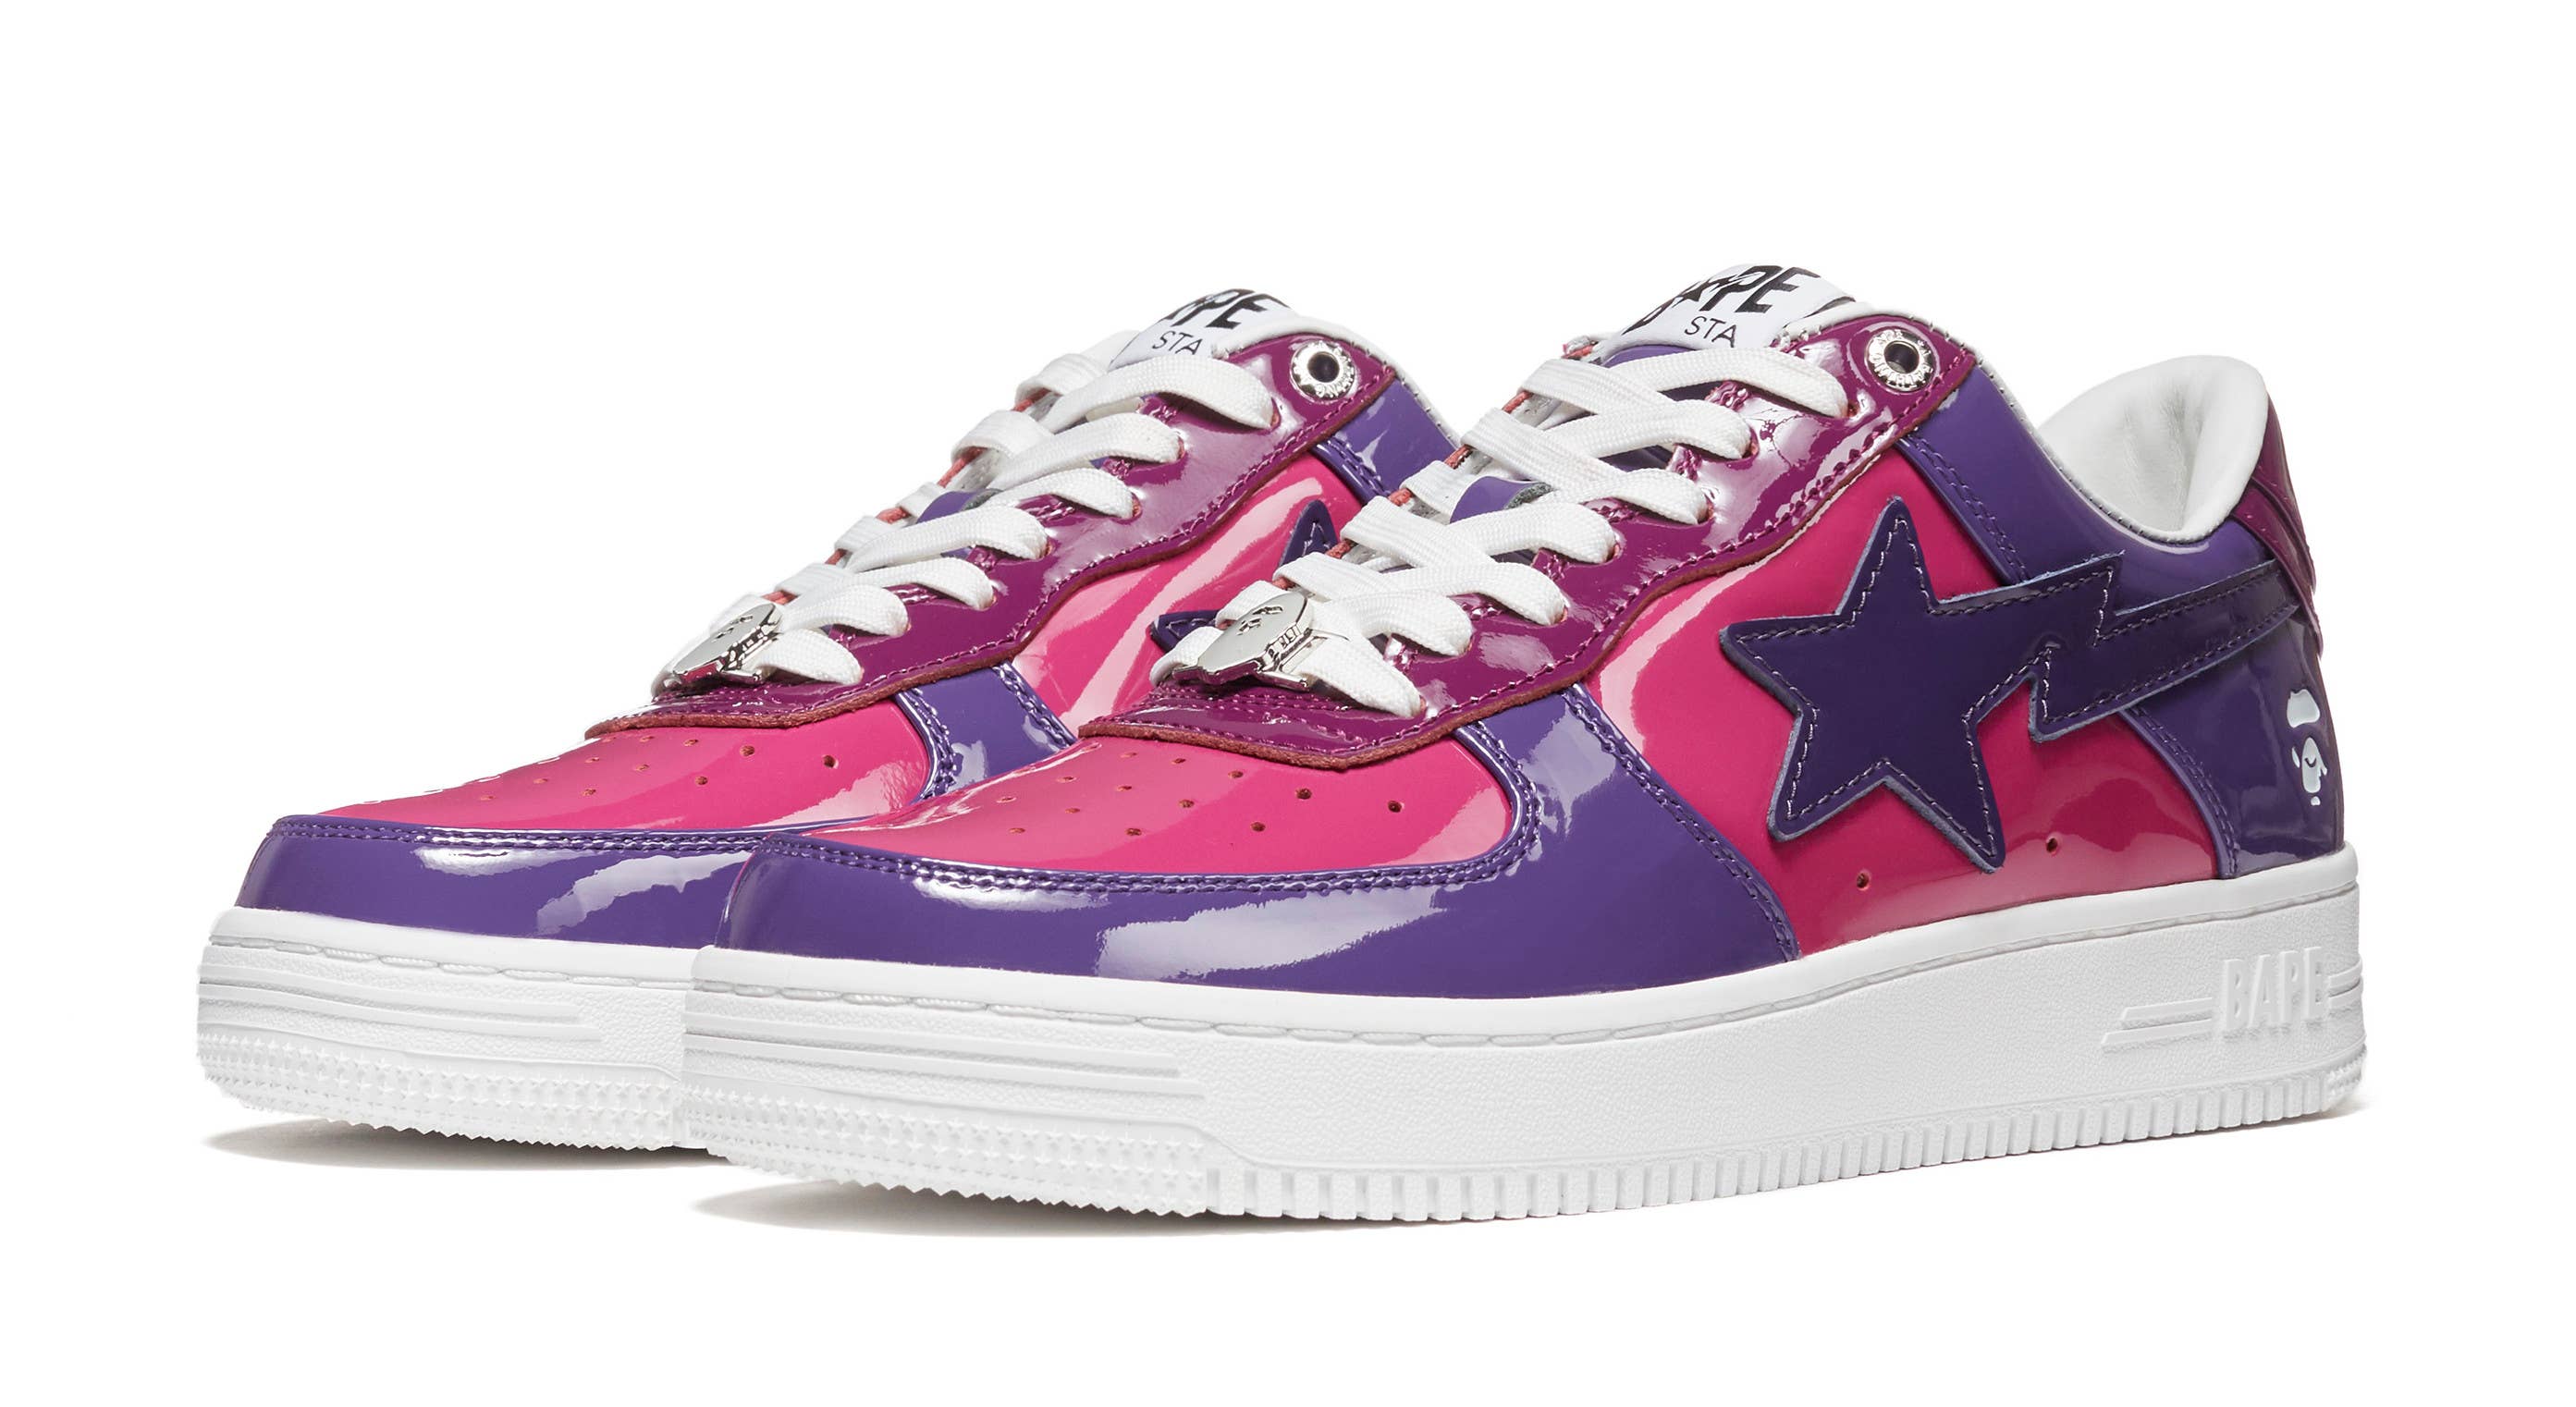 Bape Has a Colorful Set of Bape Stas Dropping Next Week | Complex